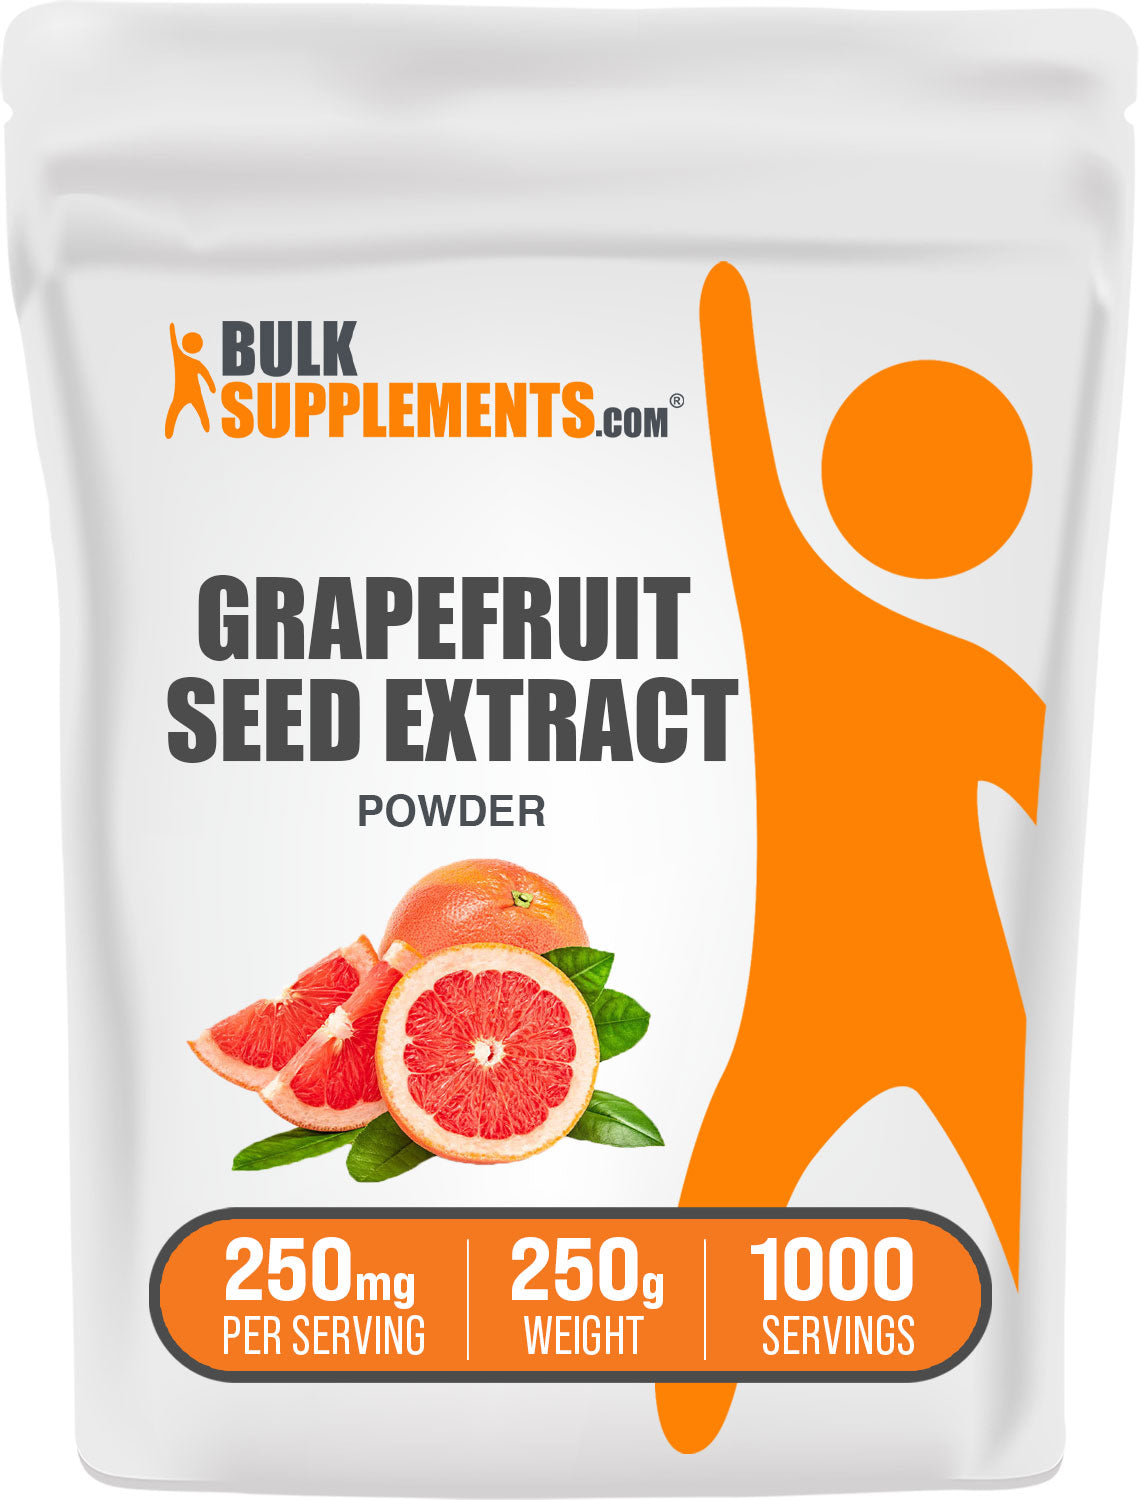 Grapefruit Seed Extract 250g